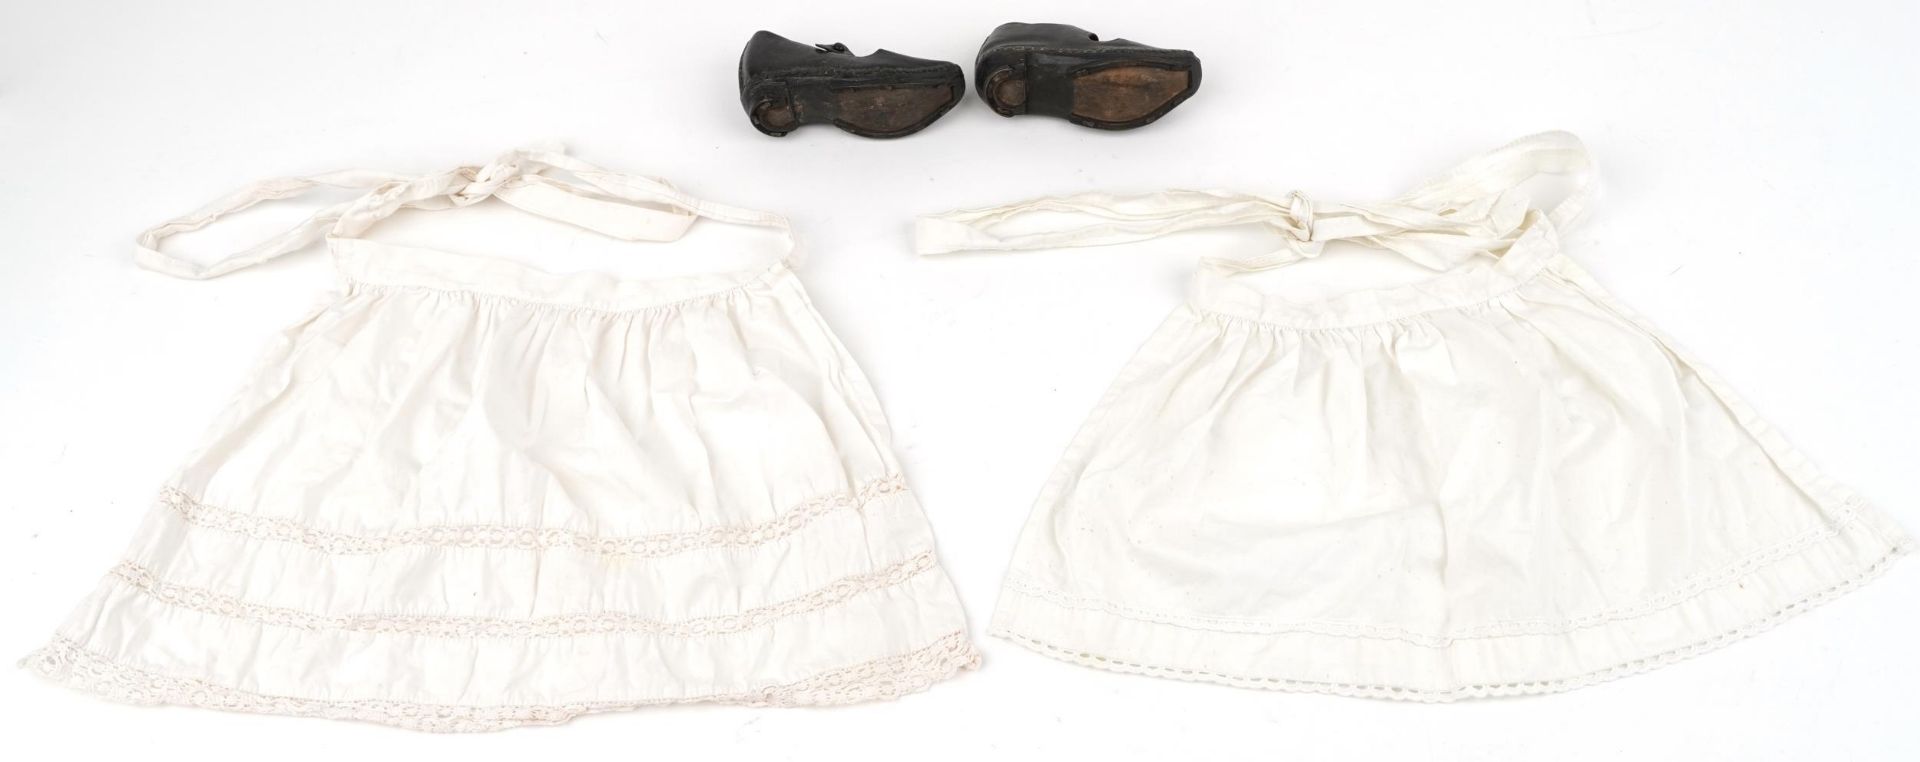 Pair of Victorian leather child's shoes and two aprons - Image 4 of 4